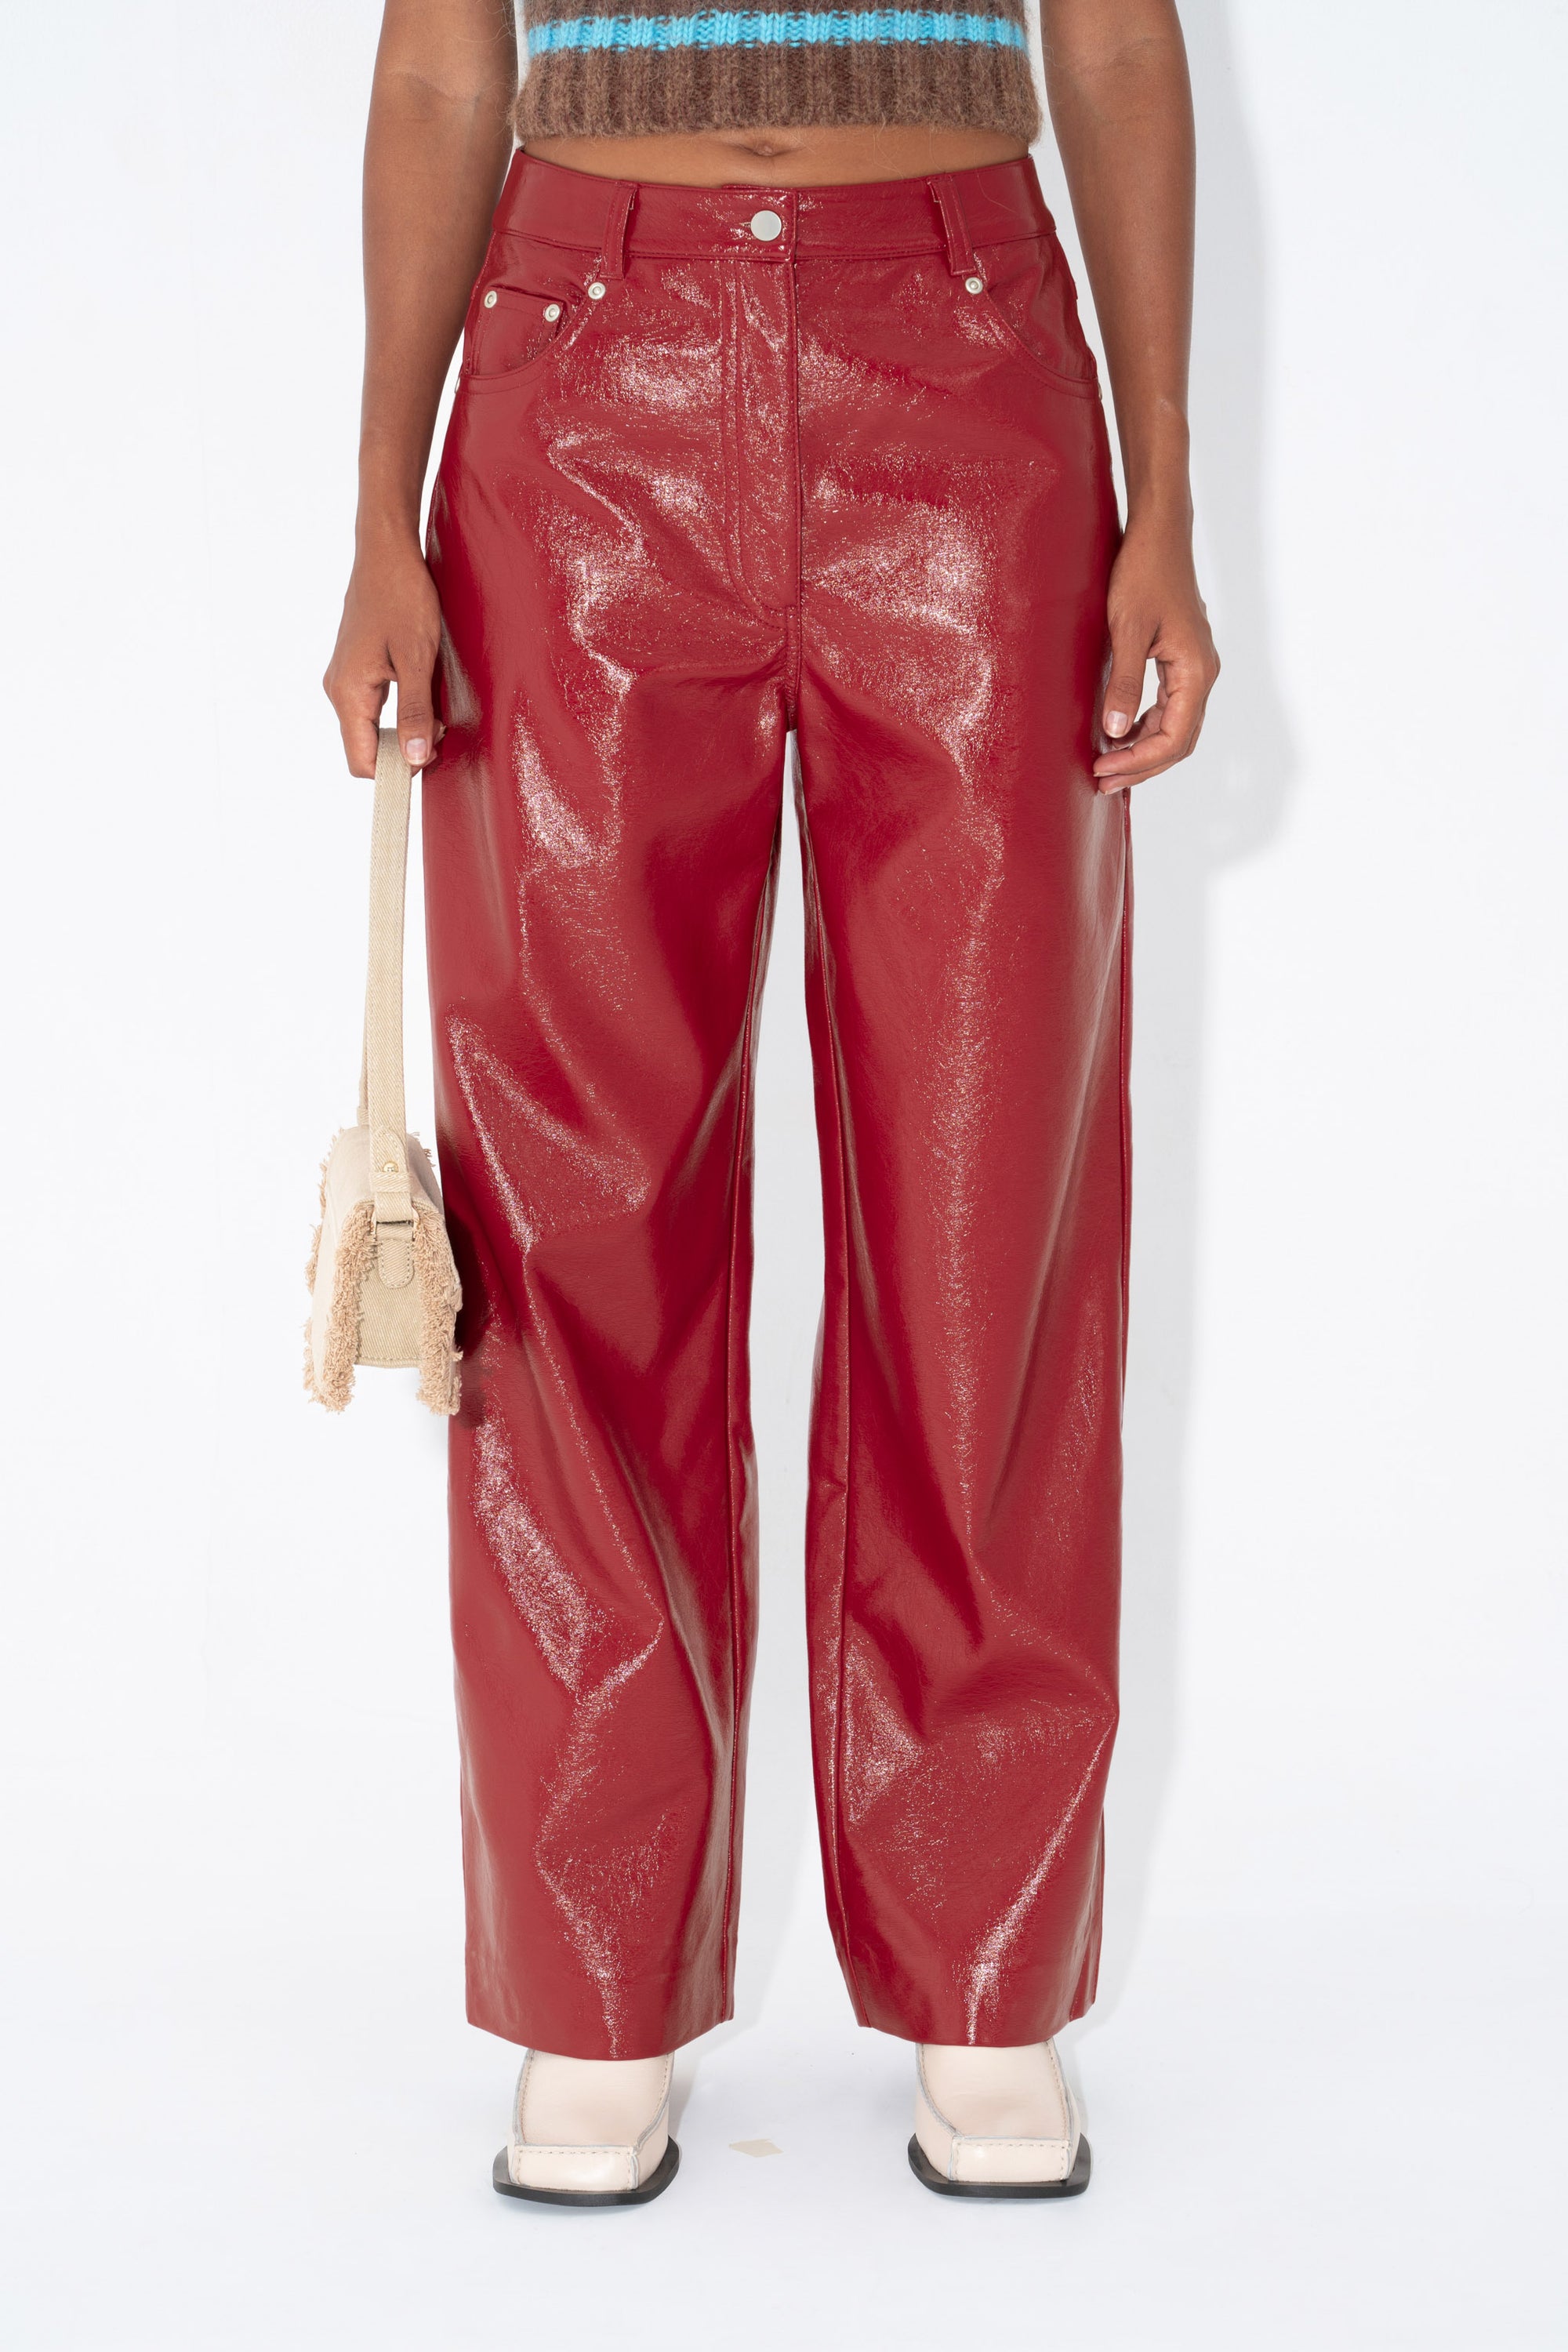 Arthur Apparel Mid Rise Red Patent Leather Trousers